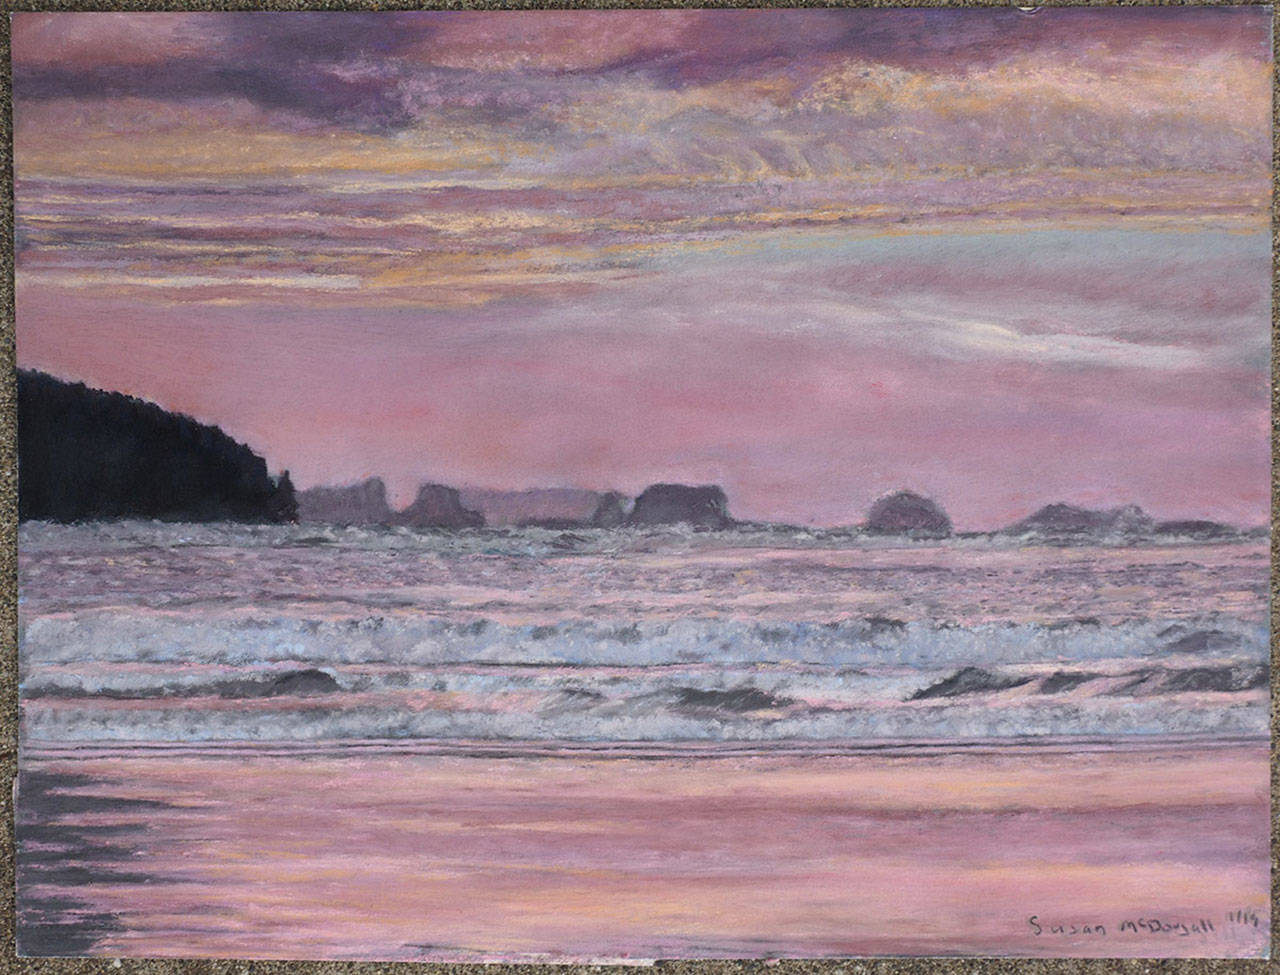 “Hobuck Beach” by Susan McDougall, featured artist at Sequim Museum & Arts. Submitted art